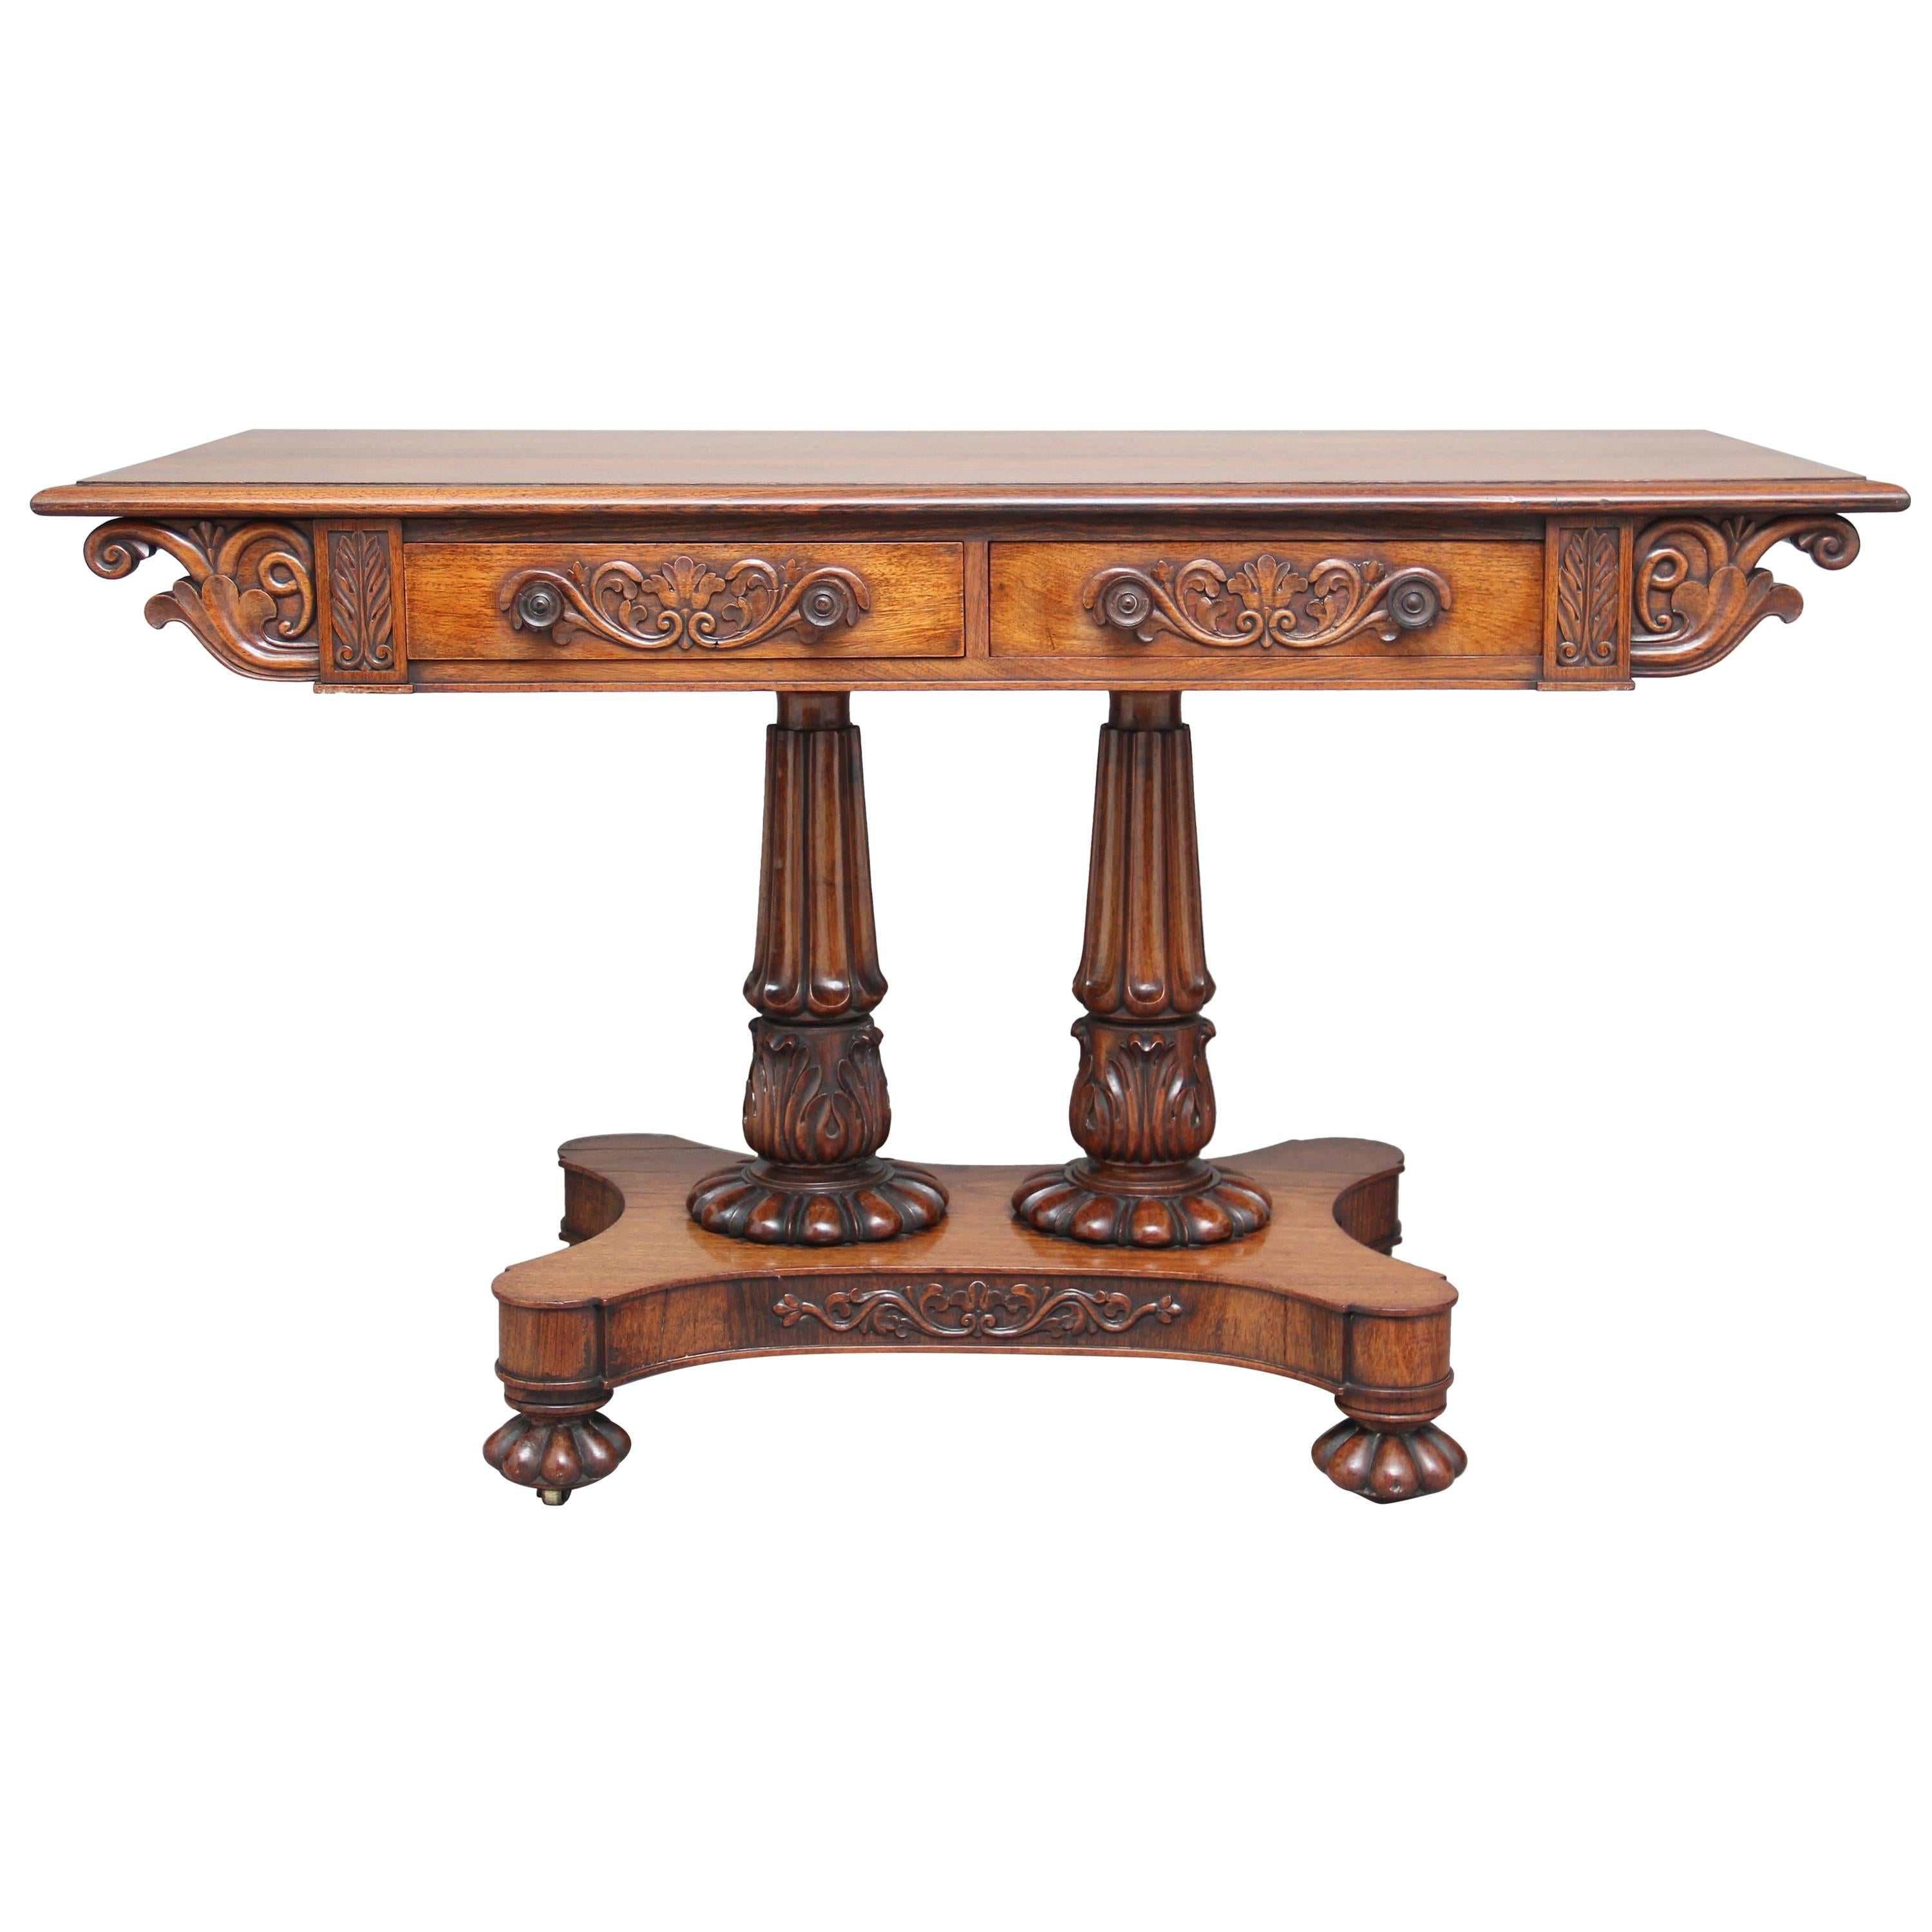 19th Century Anglo-Indian Sofa Table